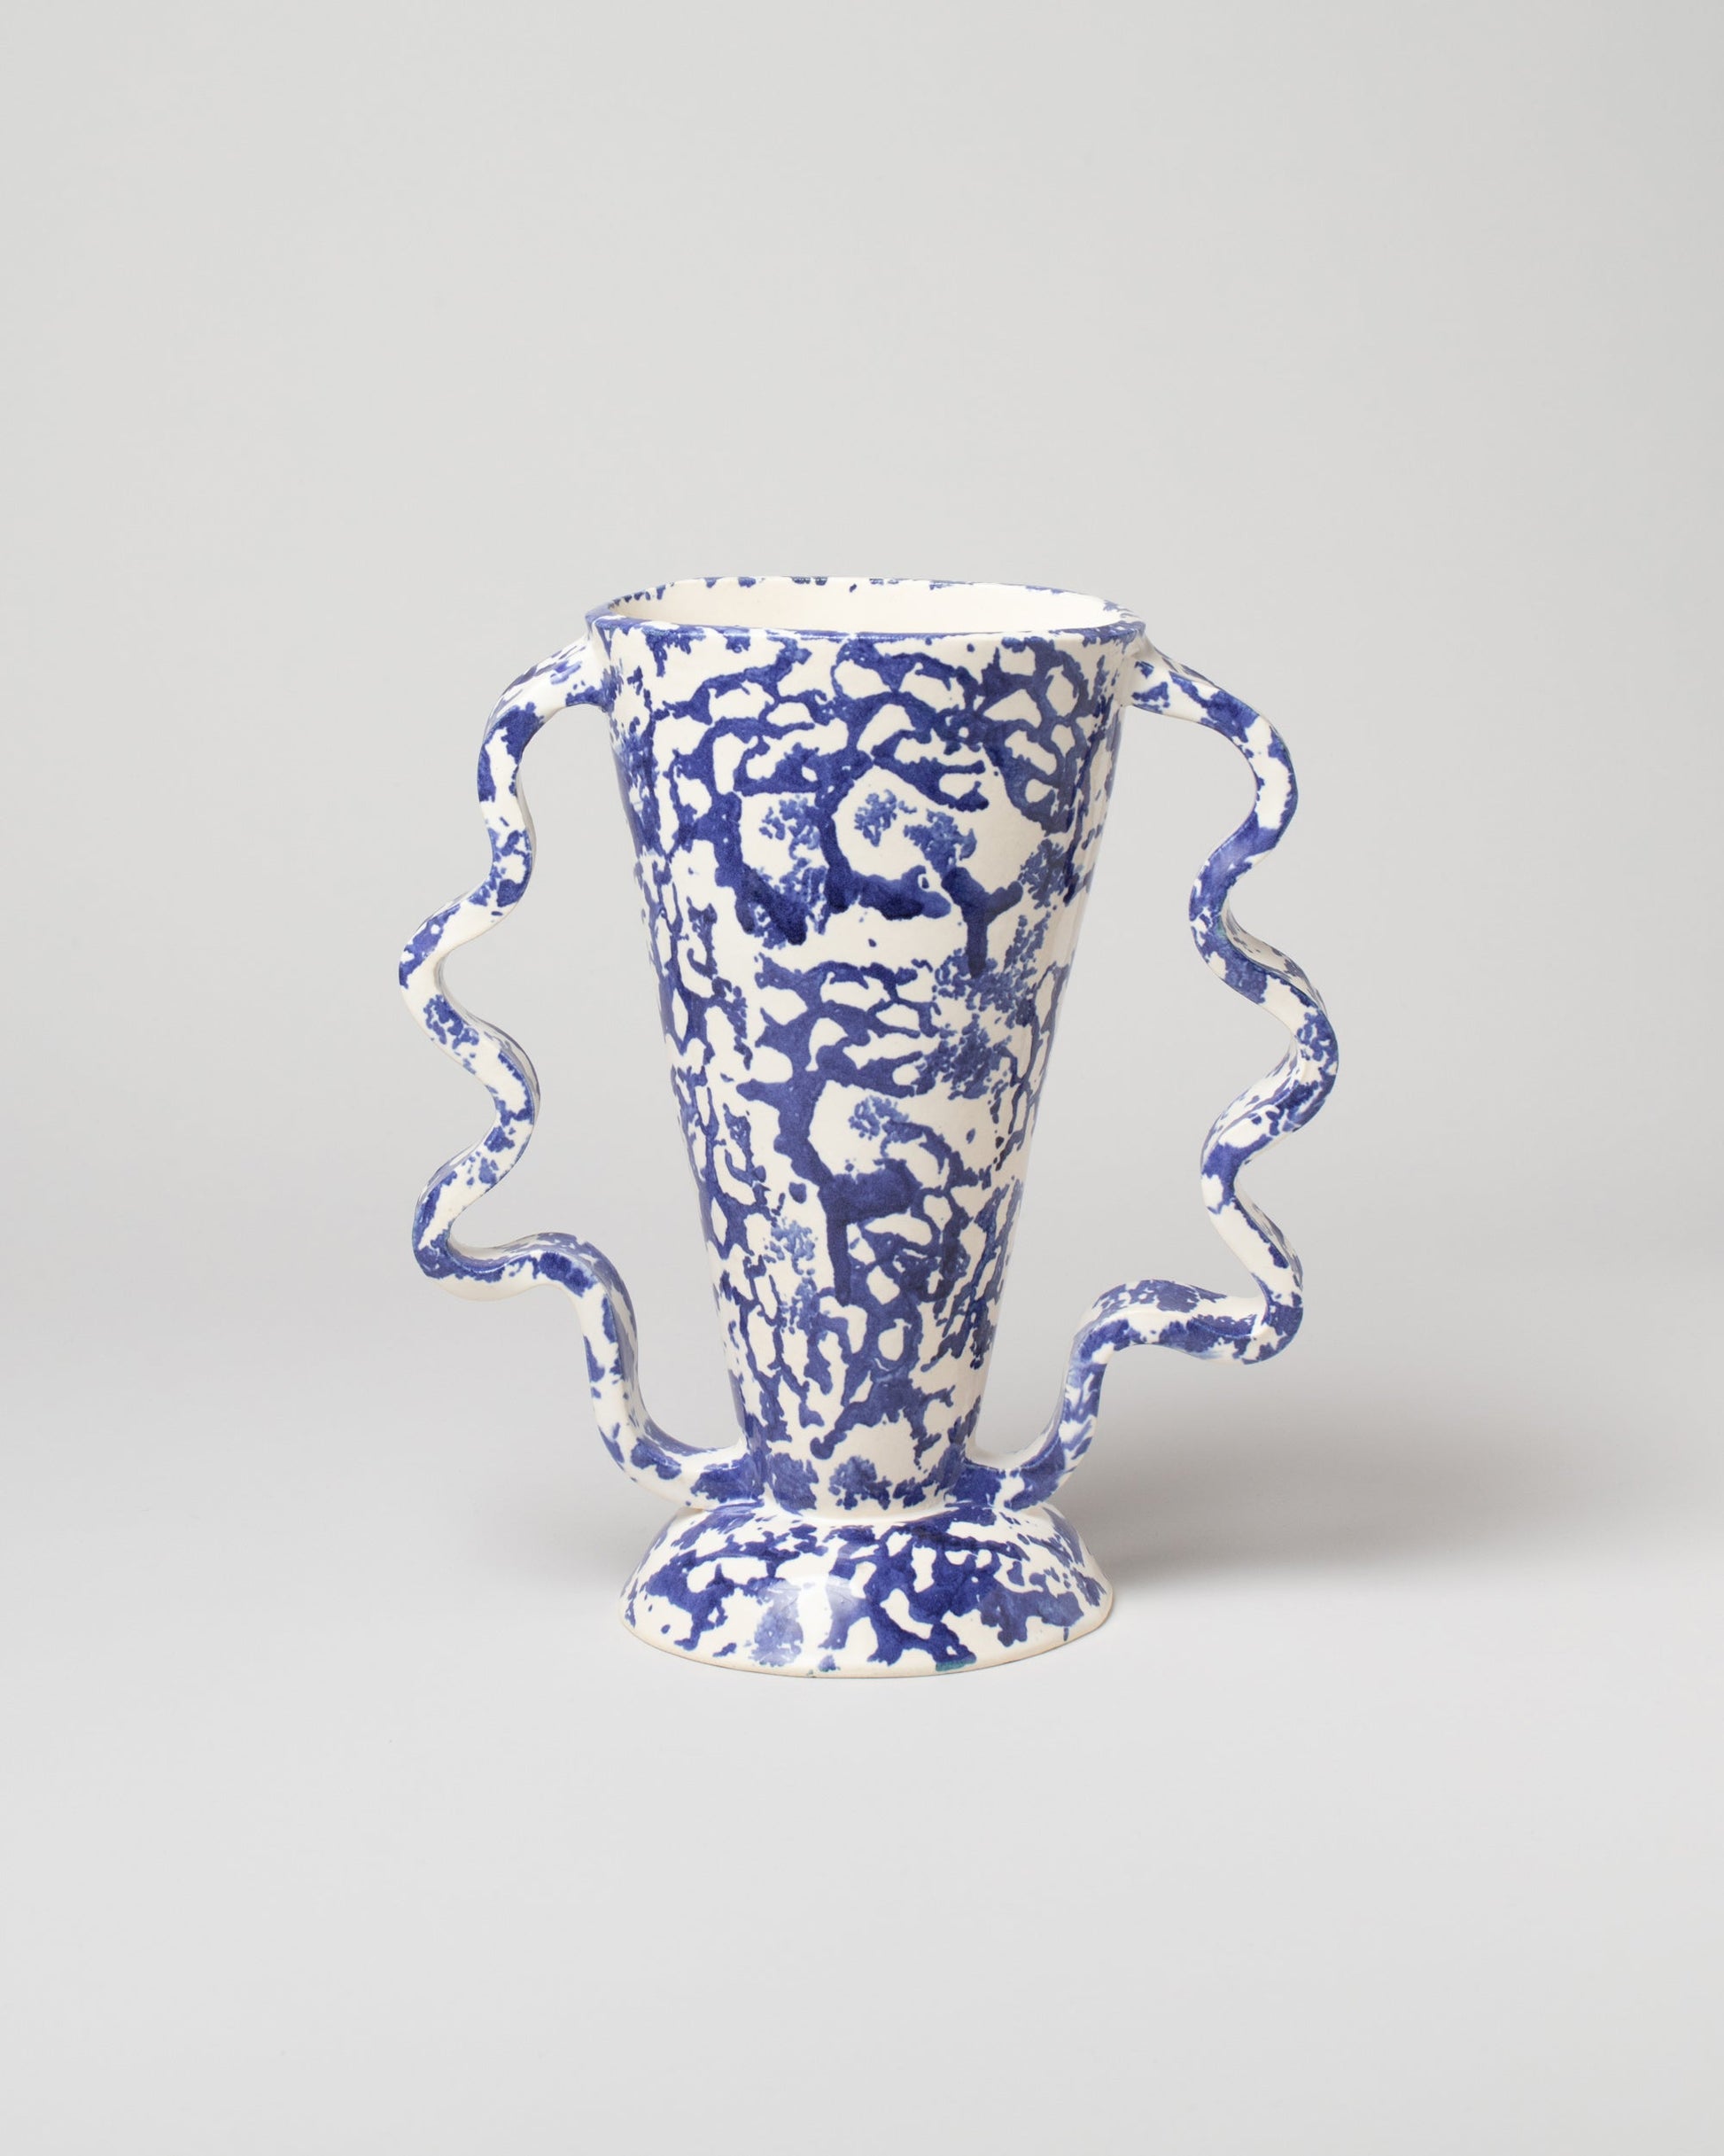 Morgan Peck Blue and White Stretch Vase on light color background.